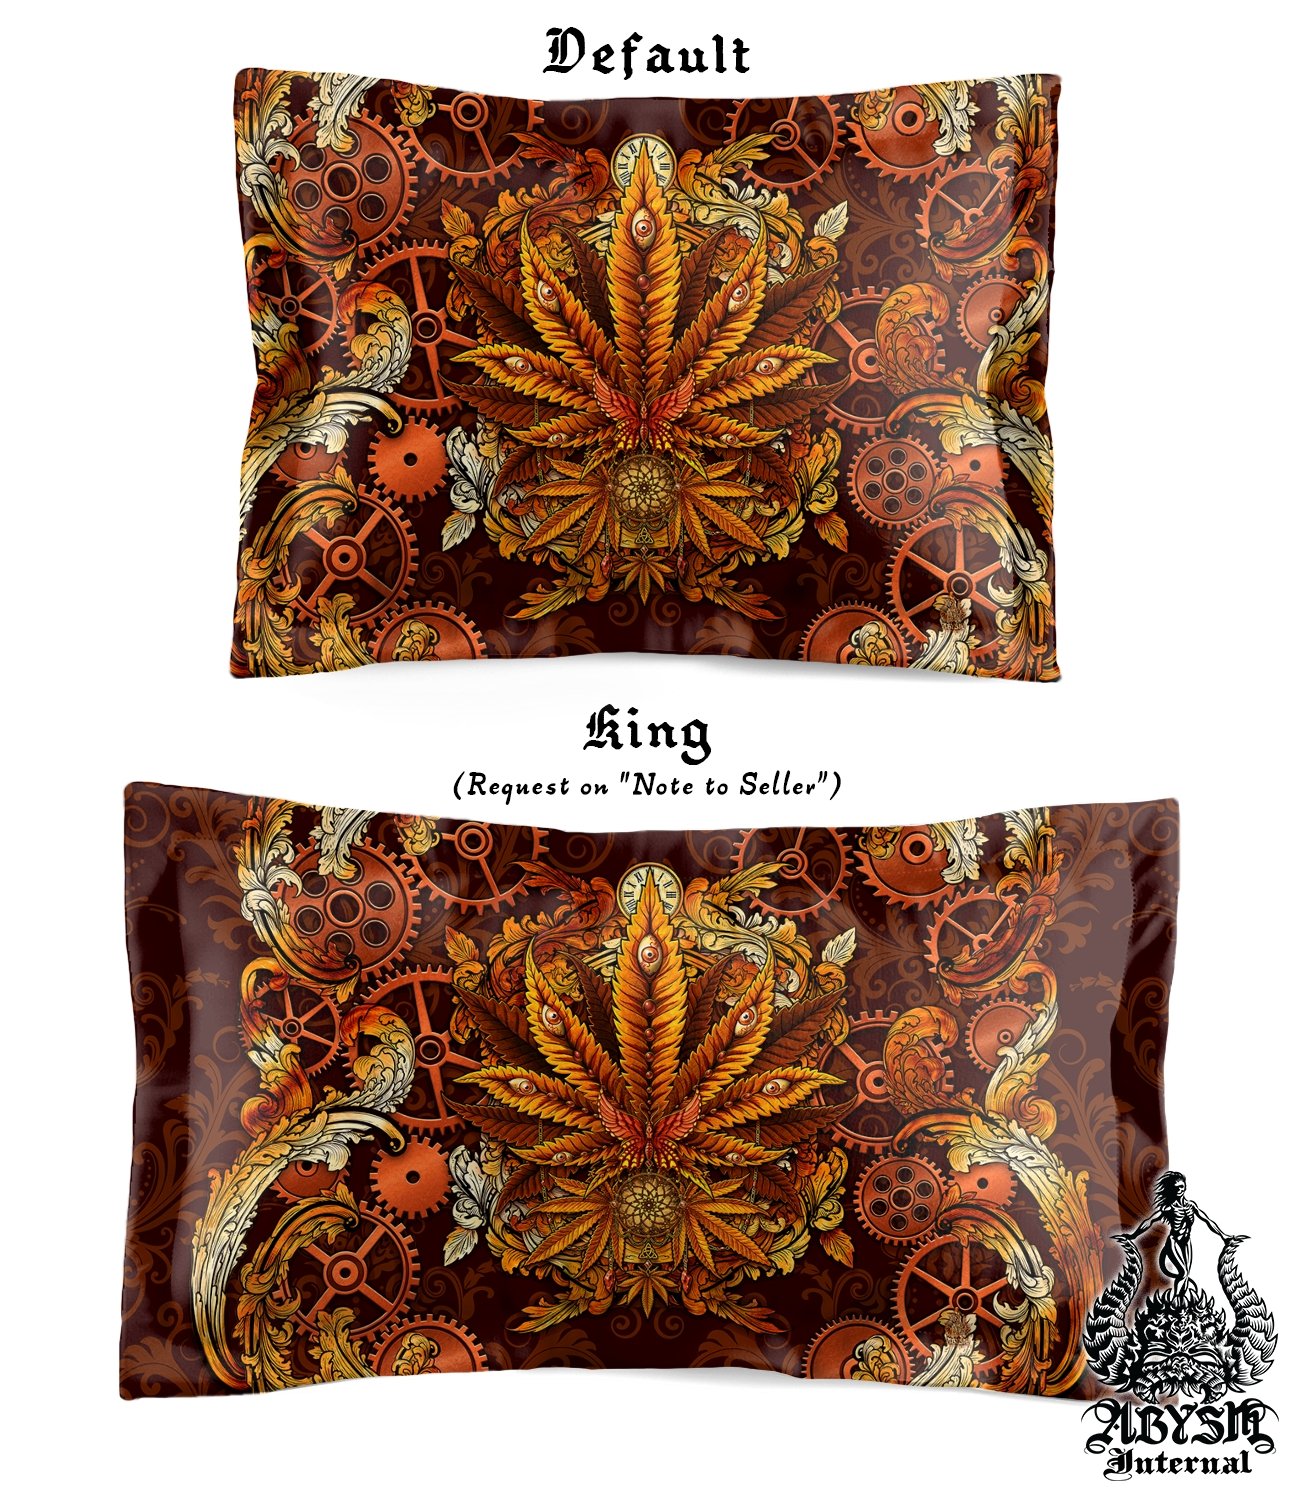 Weed Bedding Set, Comforter and Duvet, Cannabis Bed Cover, Marijuana Bedroom Decor, King, Queen and Twin Size, 420 Room Art - Steampunk - Abysm Internal